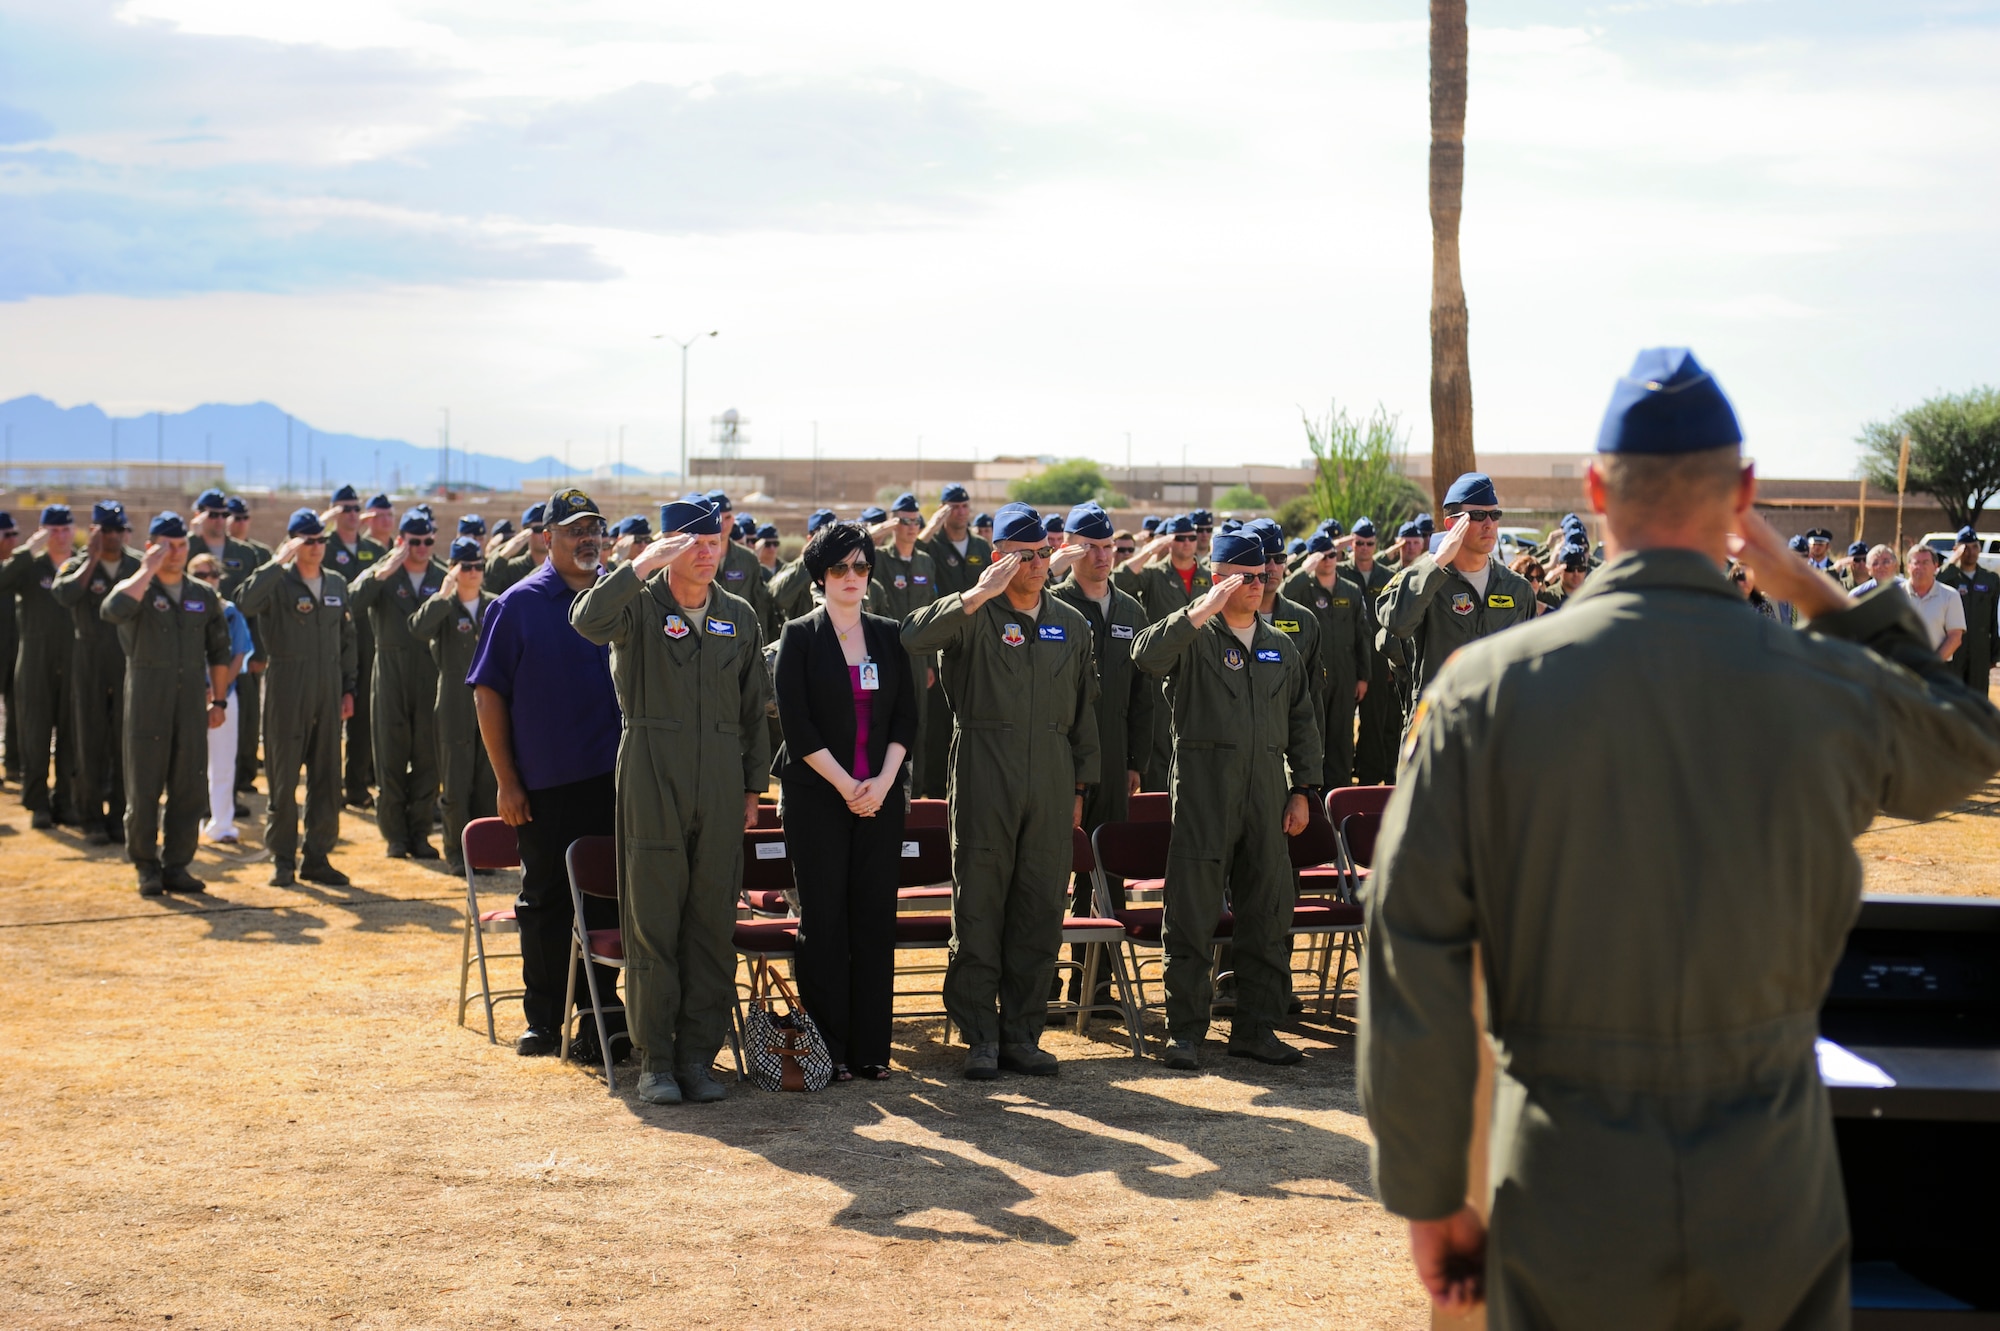 U.S. Air Force Airmen present arms in honor of fallen A-10 pilots during the opening ceremony of the 2014 Hawgsmoke Competition at Davis-Monthan Air Force Base, Ariz., July 9, 2014.  In remembrance of the fallen pilots, the participants of the 2014 Hawgsmoke Competition also held a moment of silence, took a traditional shot of whiskey and smashed the shot glass. (U.S. Air Force photo by Airman 1st Class Sivan Veazie/Released)